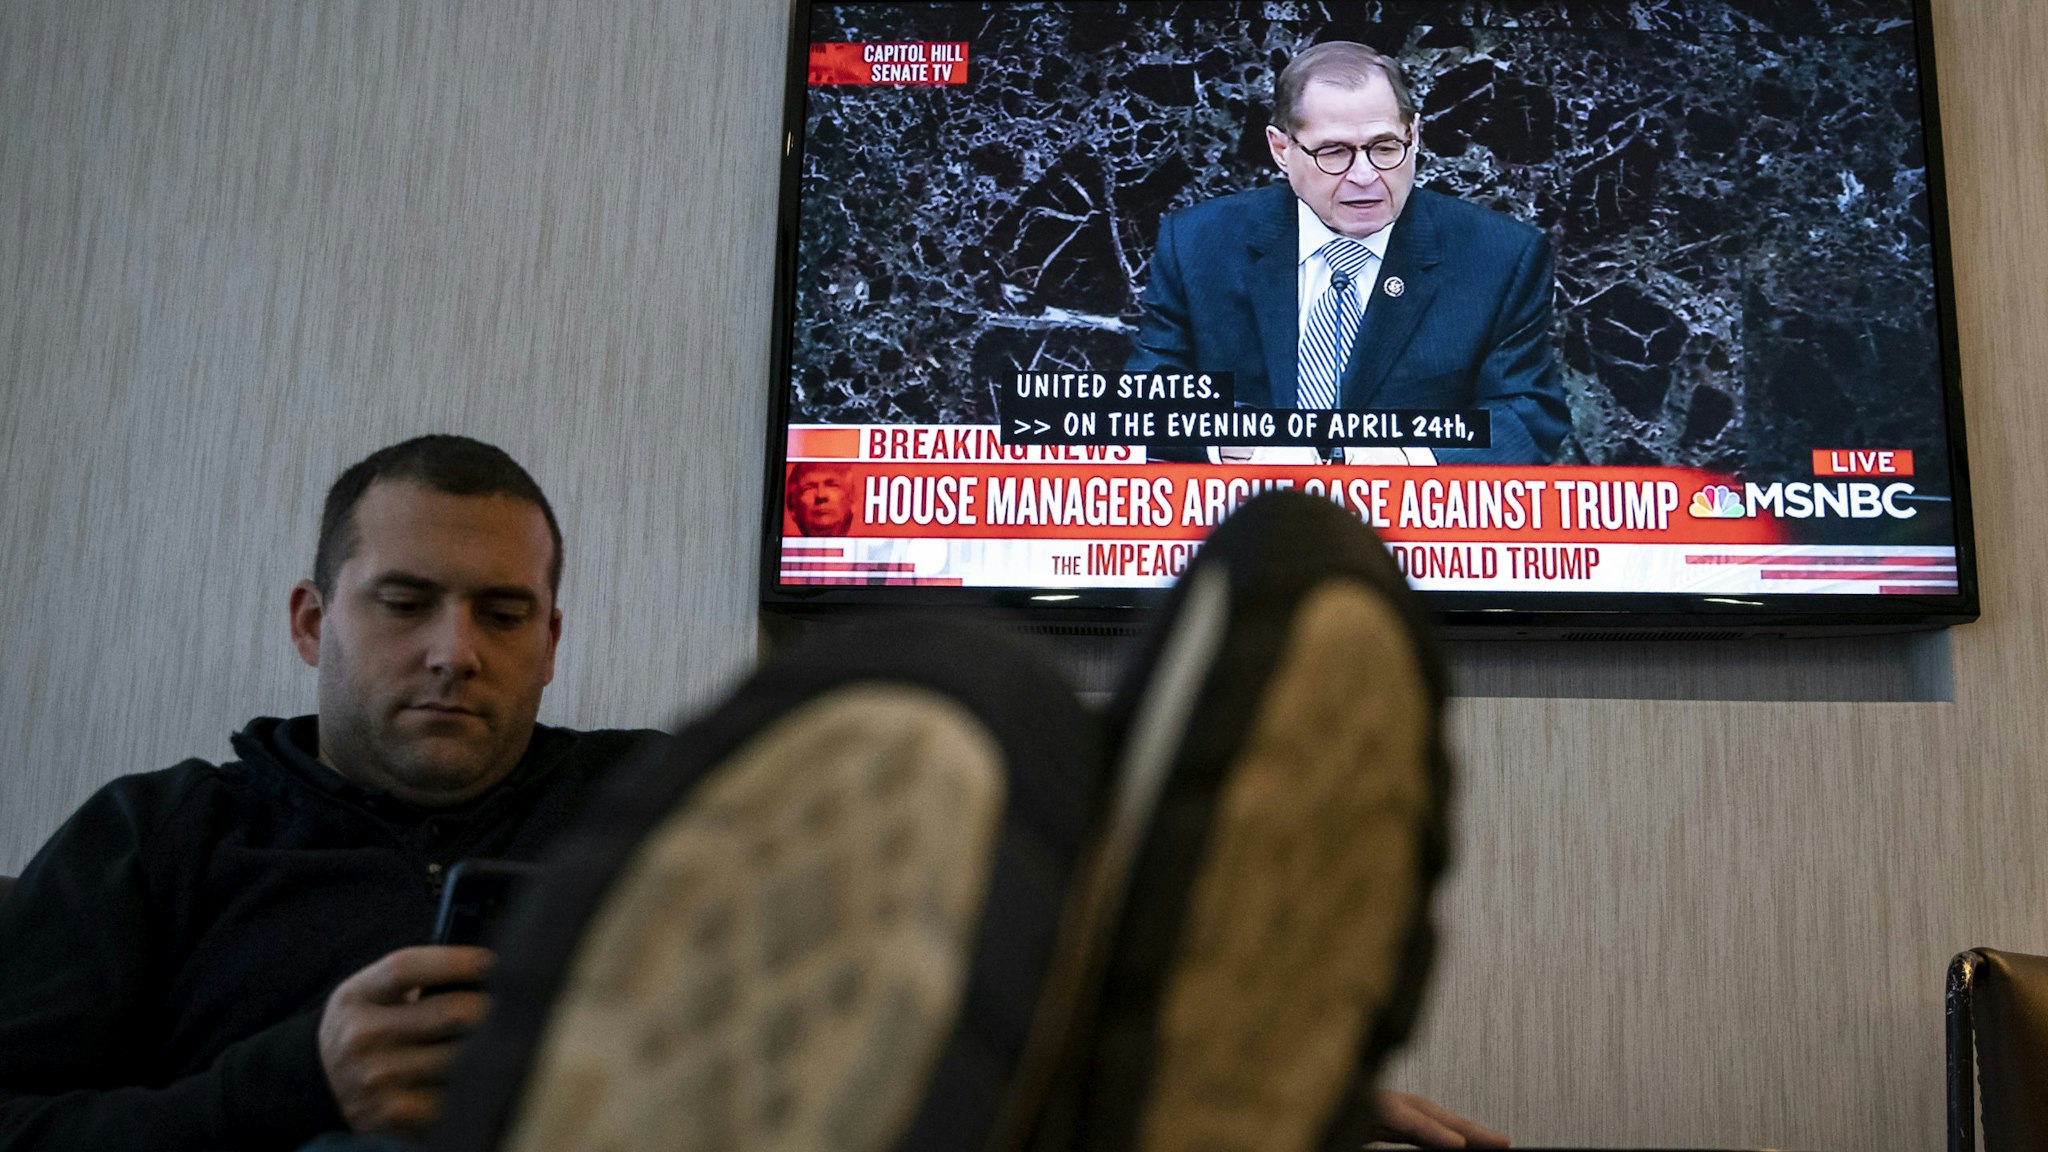 DES MOINES, IA - JANUARY 22: A man uses his cell phone as a television screen shows House impeachment manager Rep. Jerry Nadler (D-NY) during the Senate impeachment trial of U.S. President Donald Trump, on January 22, 2020 at a hotel in Des Moines, Iowa. The senate impeachment trial of President Trump, which requires all senators to be present at Capitol Hill, has made it difficult for a number of democratic candidates to campaign in Iowa with less than two week until the caucus. (Photo by Al Drago/Getty Images)